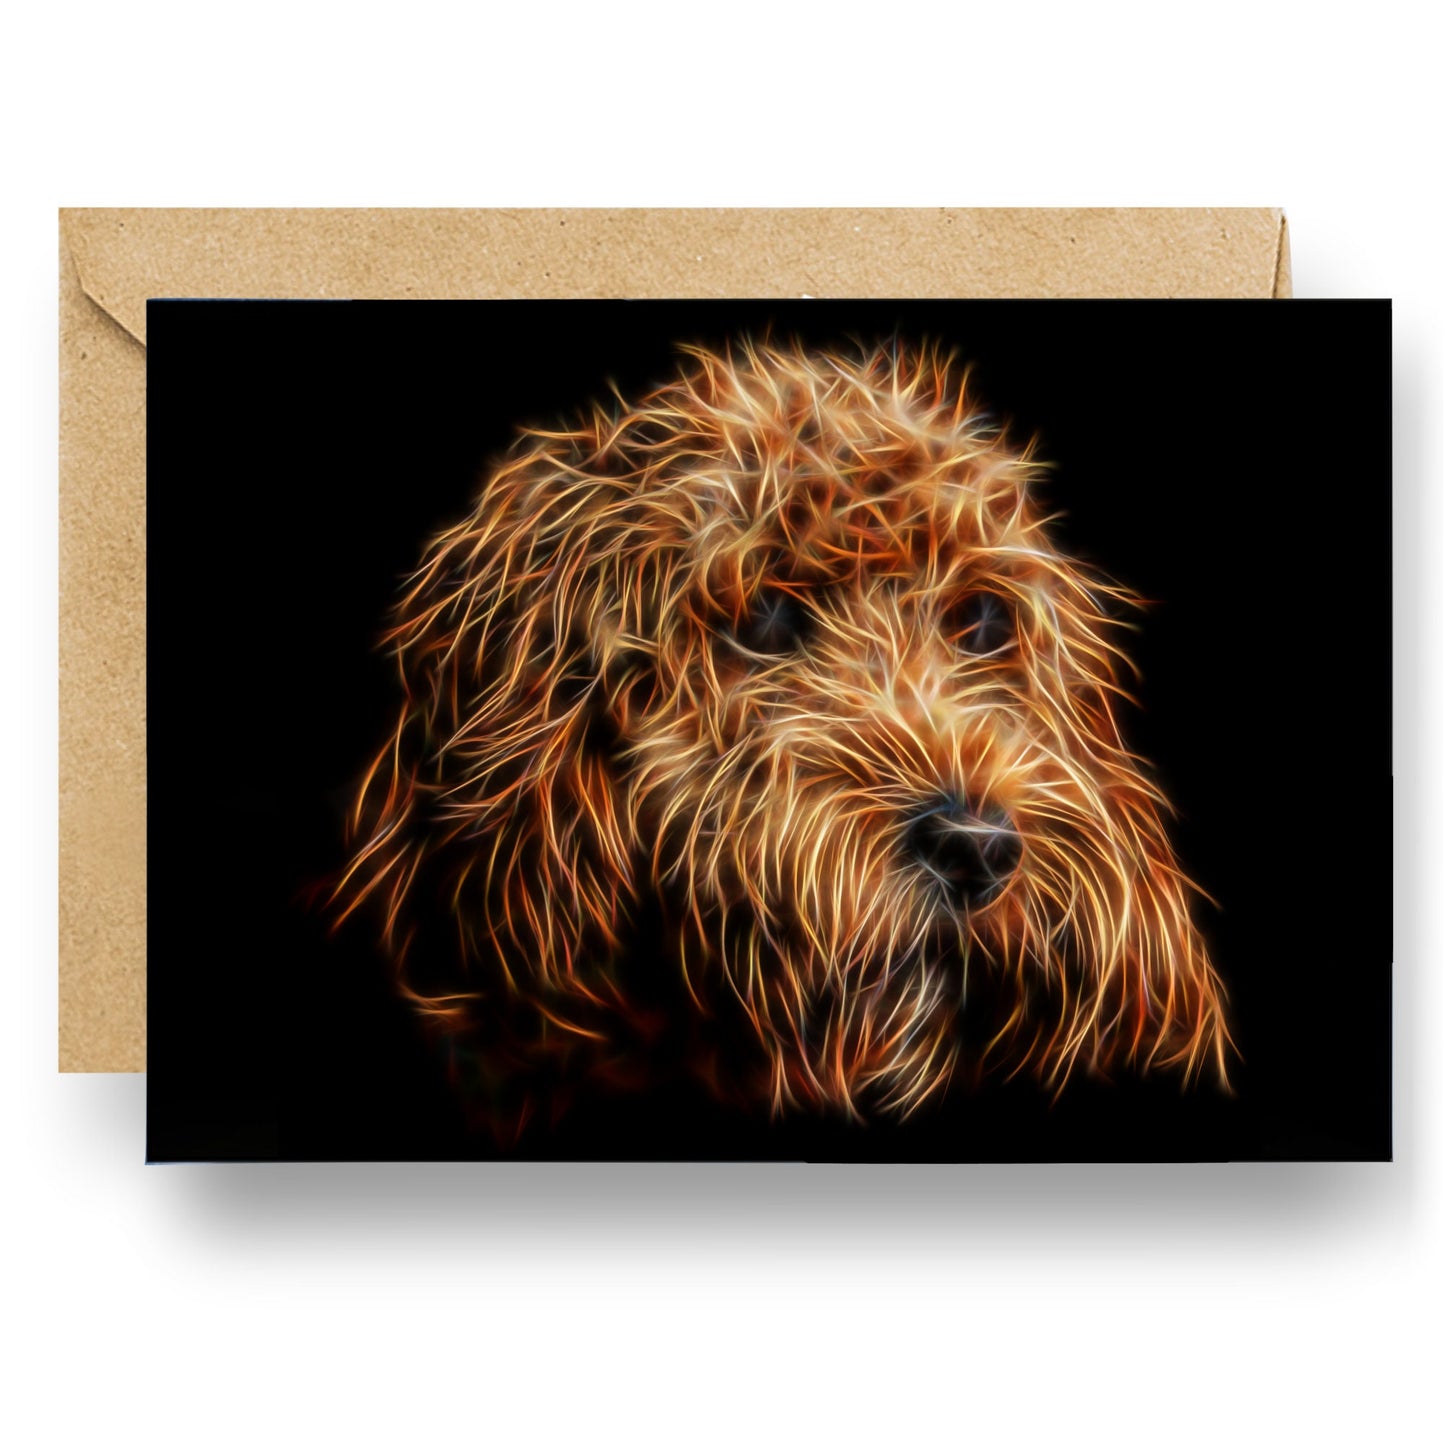 Red Cockapoo Greeting Card with Stunning Fractal Art Design. Blank Inside for Birthdays or any other Occasion